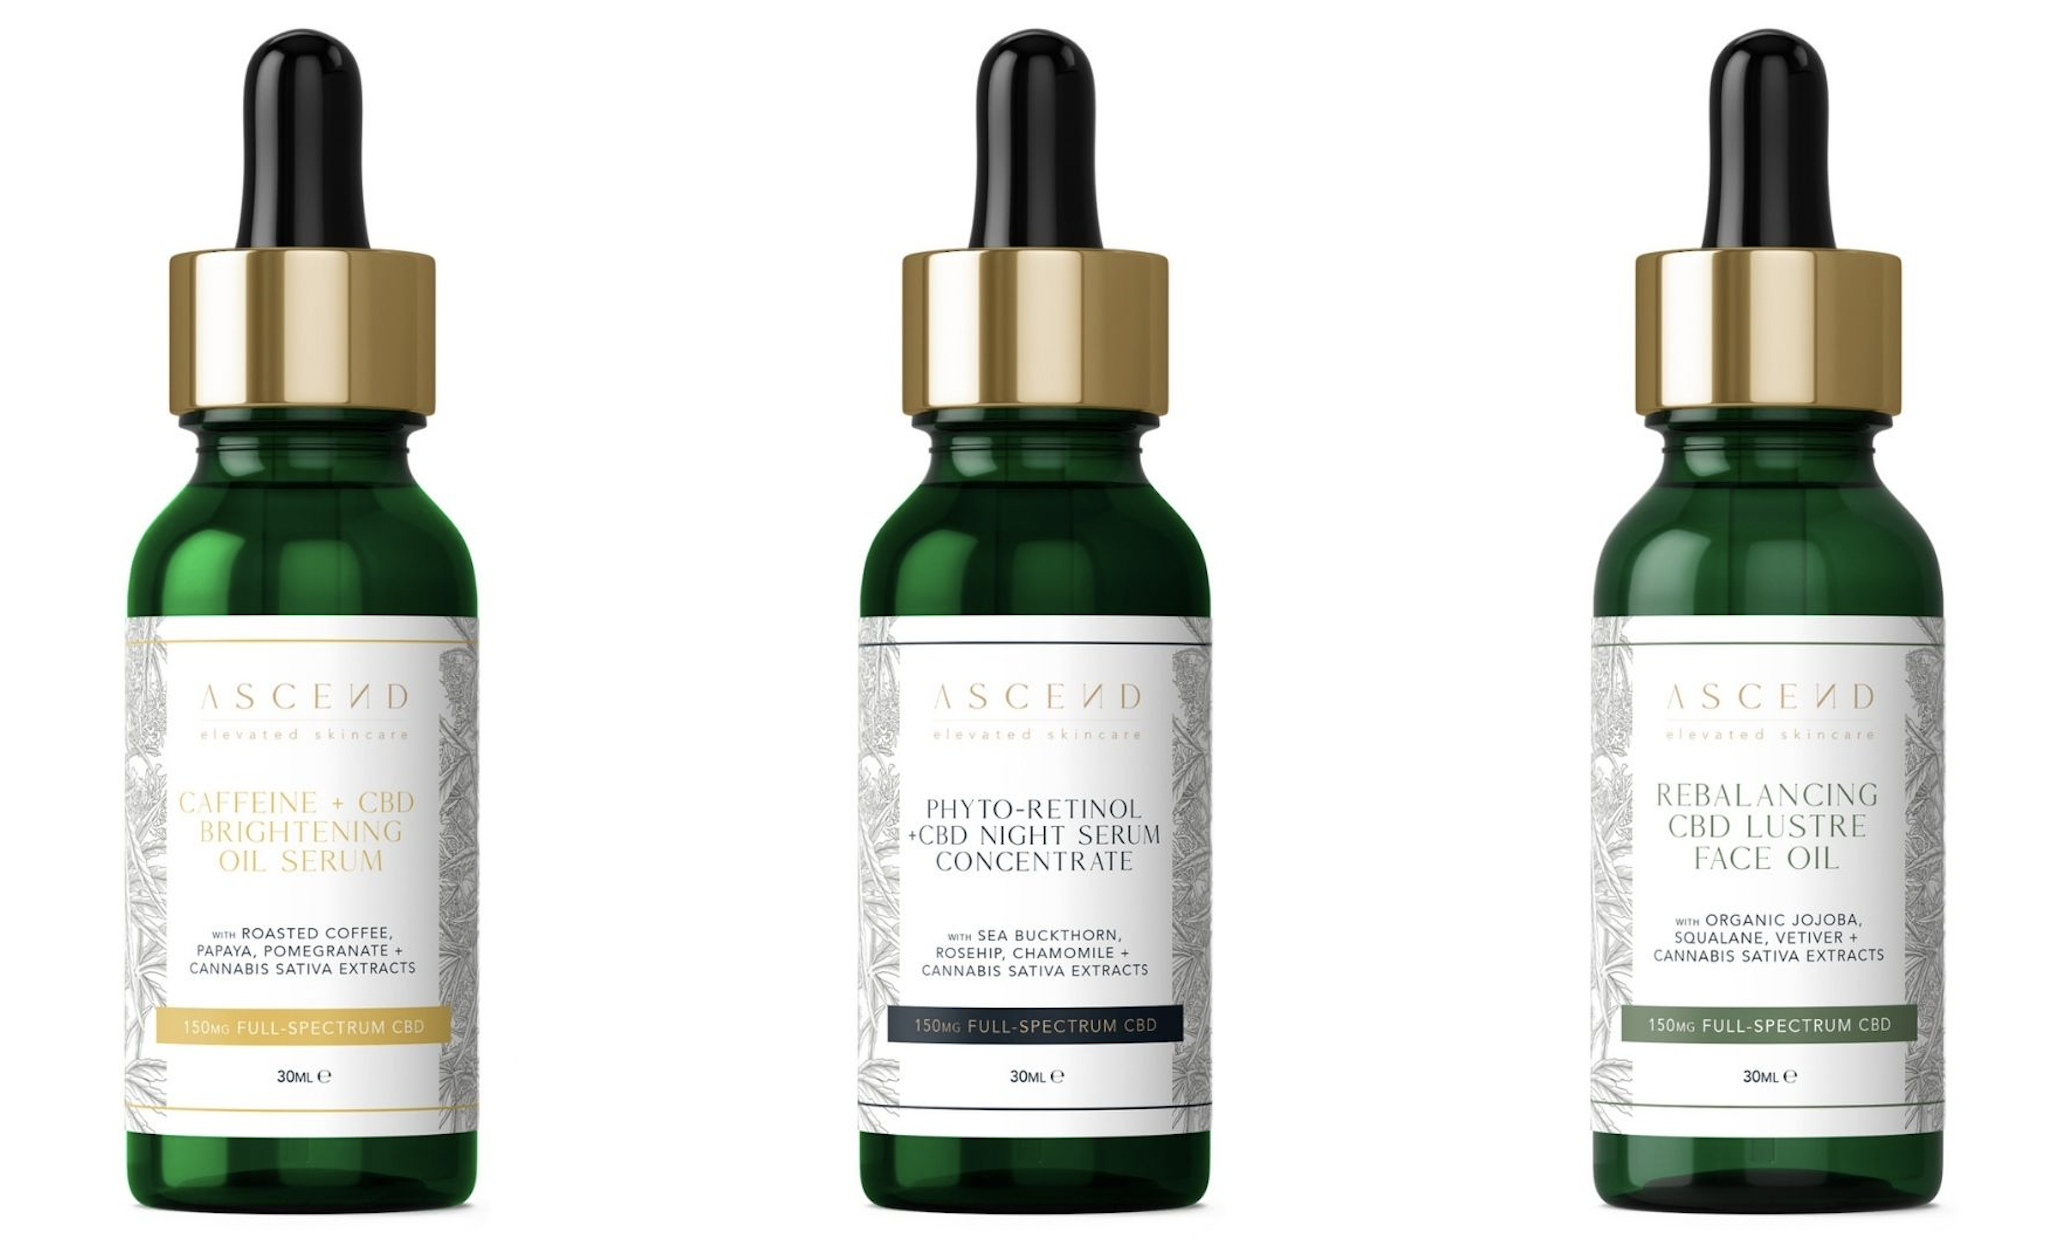 The ASCEND skincare range from mellow are CBD based known for their anti-inflammatory properties